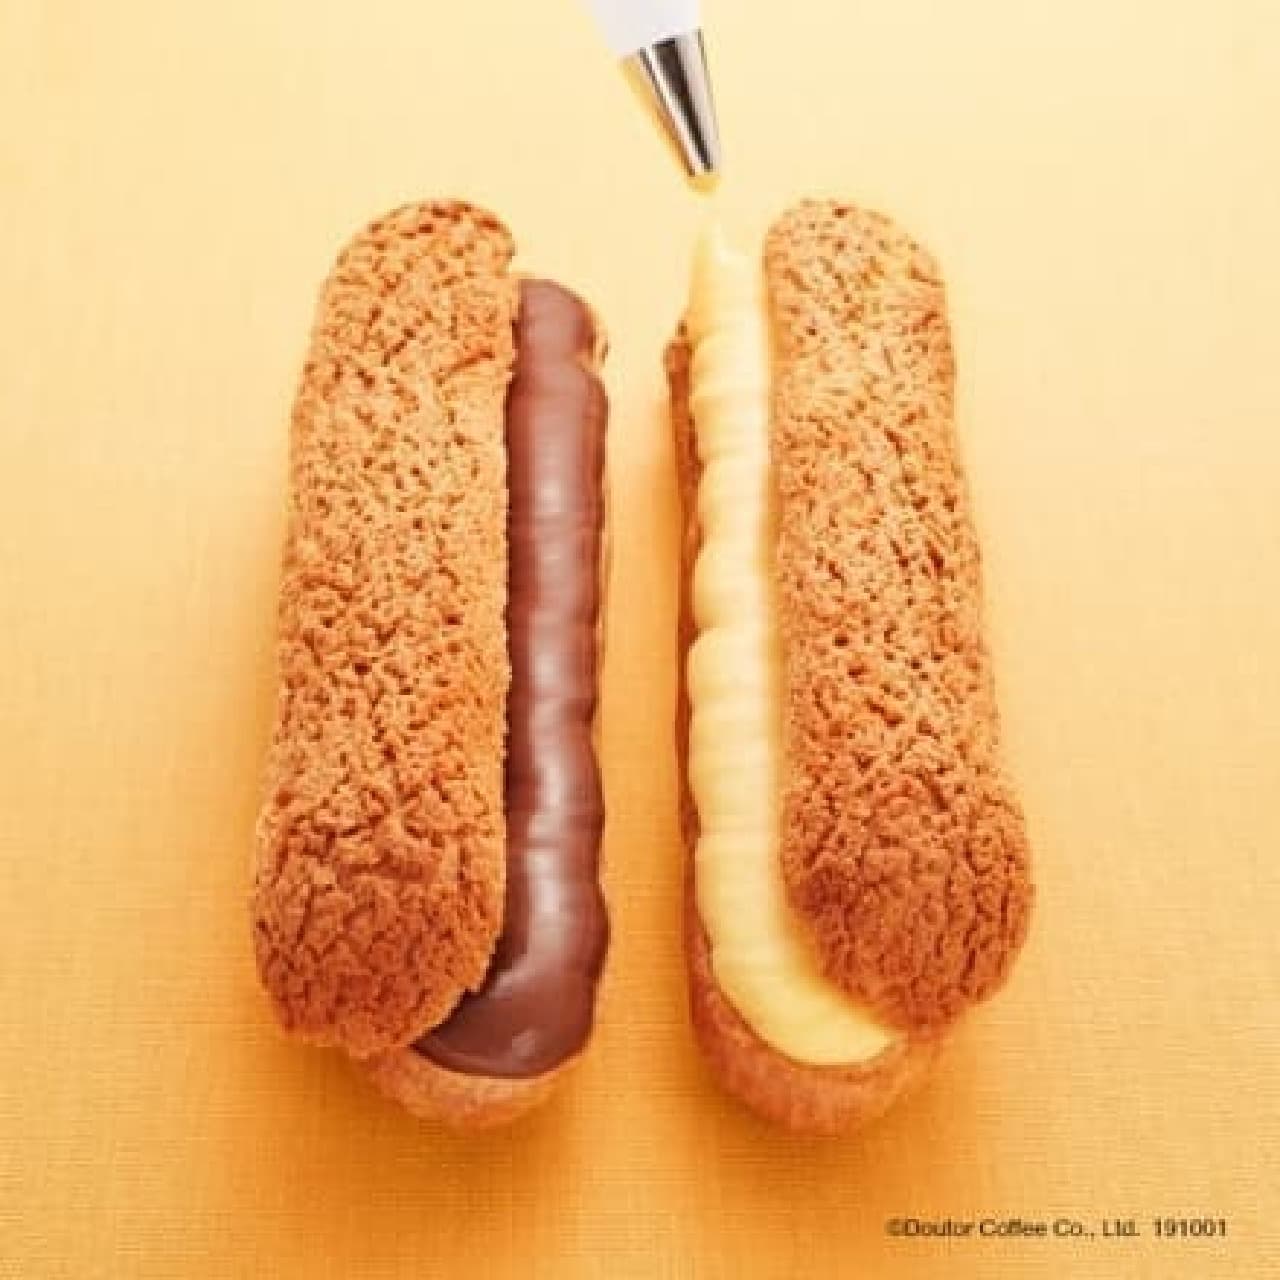 Doutor Coffee Shop, 2 types of "stick shoes"